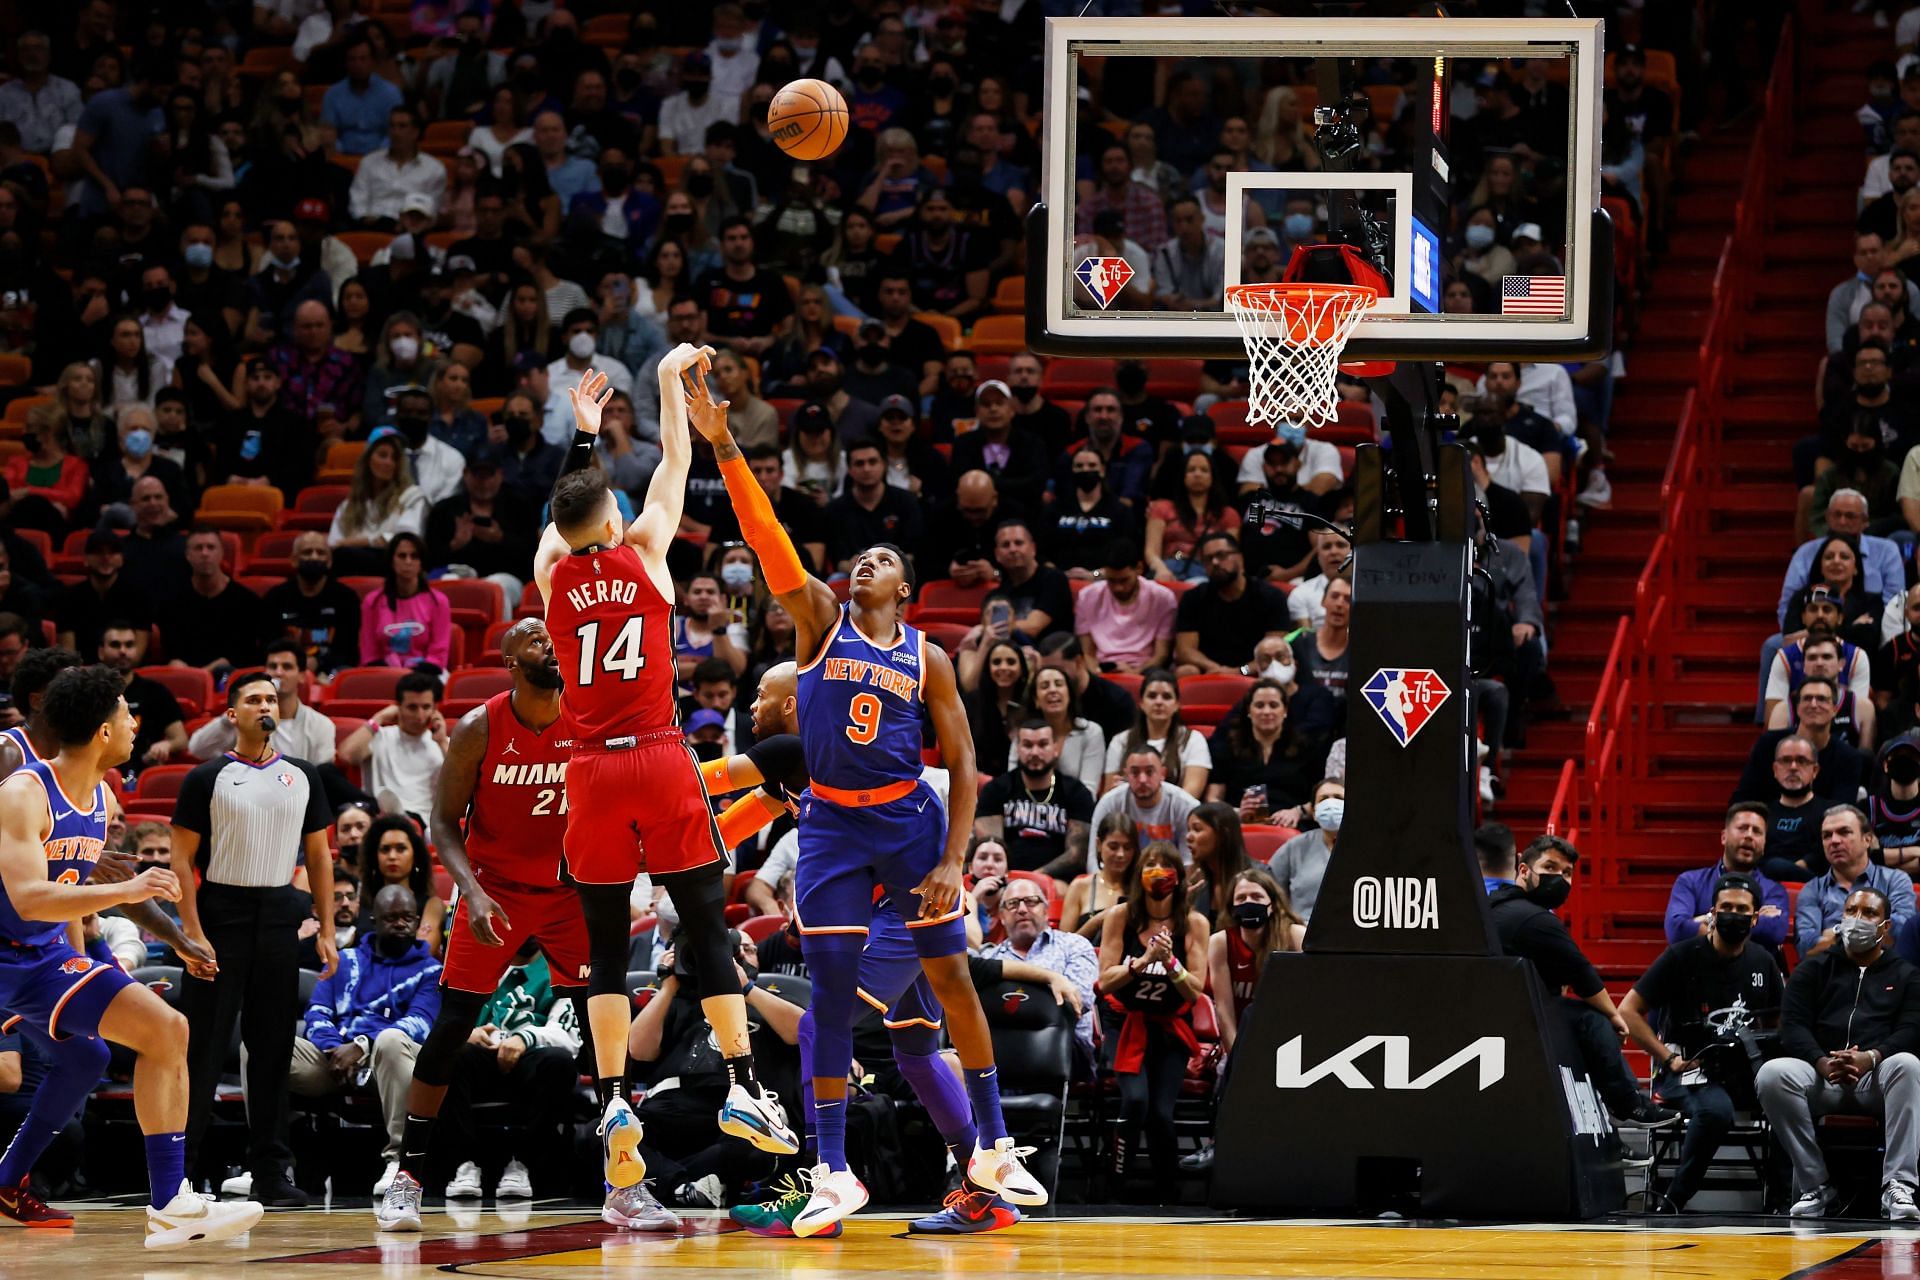 Tyler Herro (left) shoots over RJ Barrett during a game between the New York Knicks and the Miami Heat